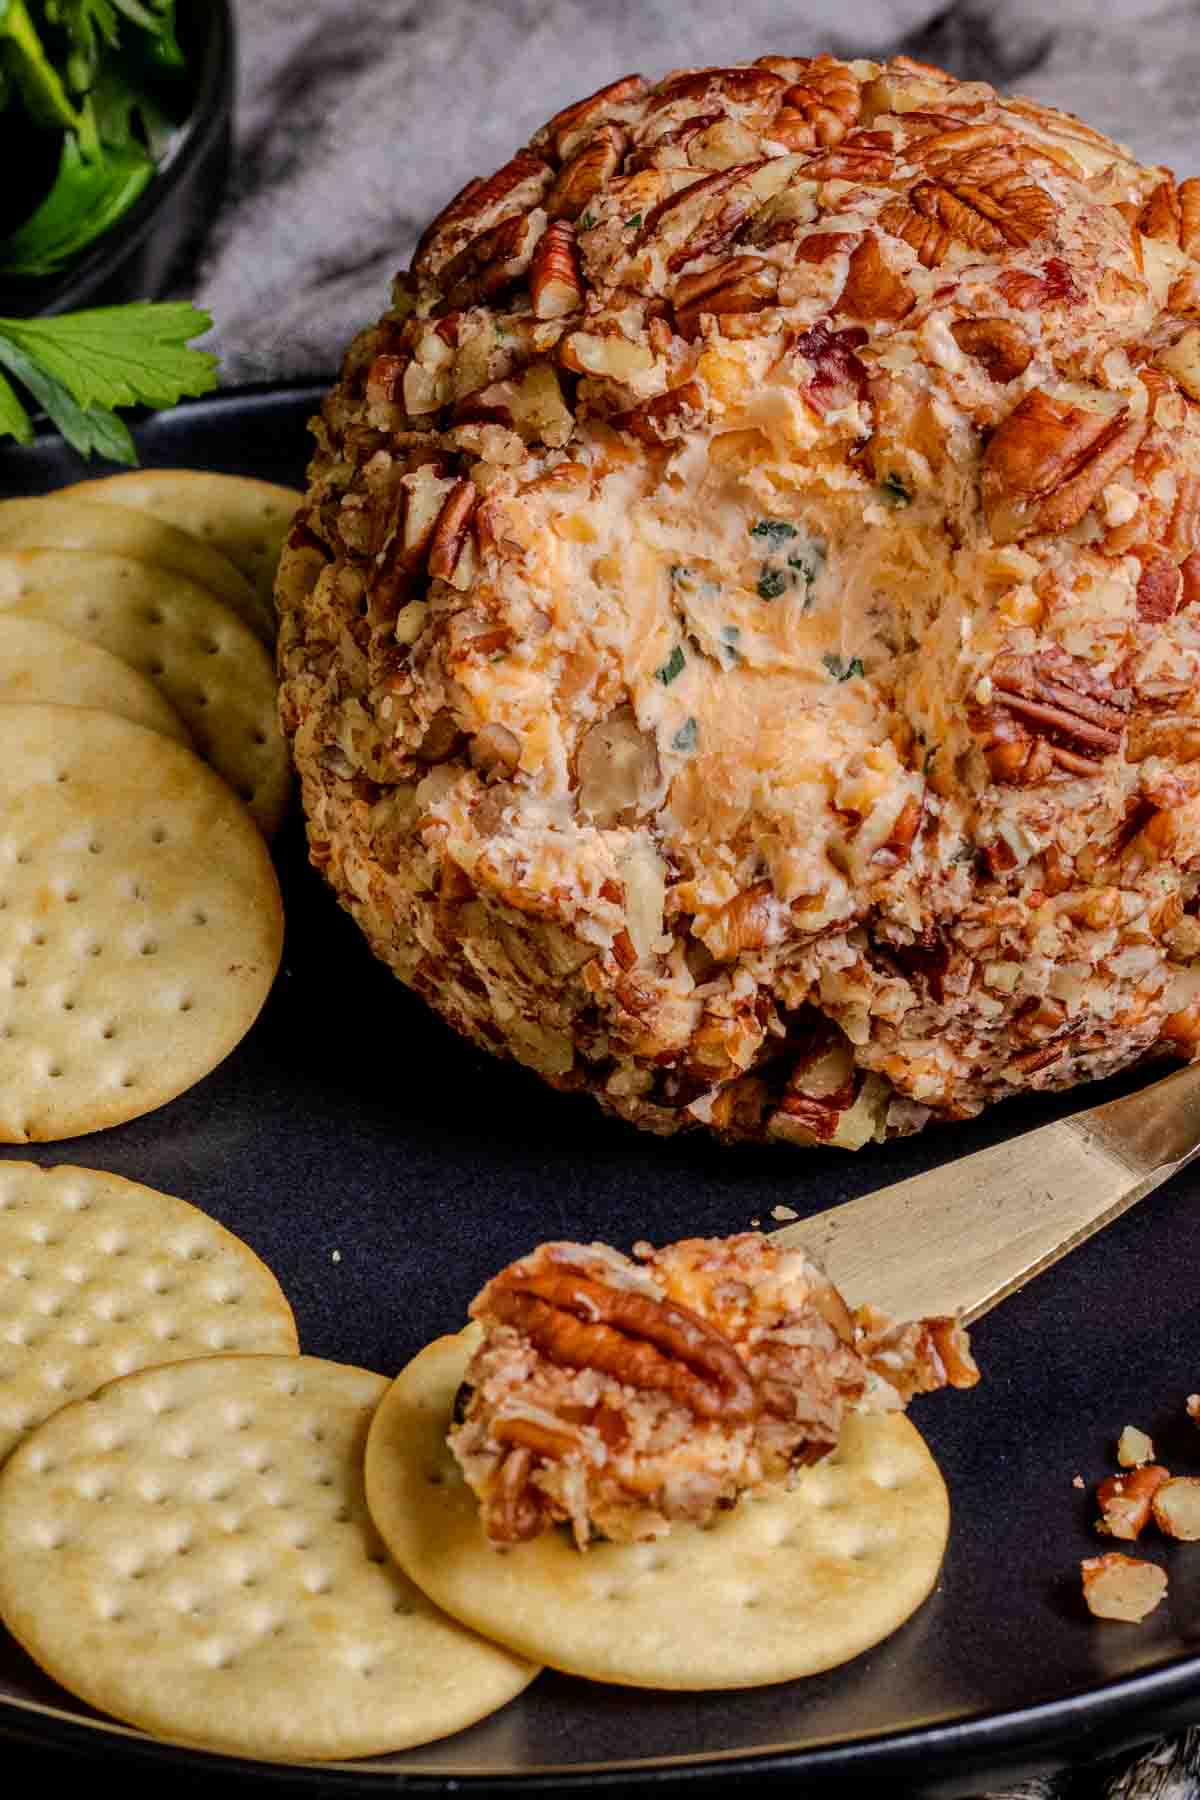 A cheese ball with crackers and nuts on a plate.